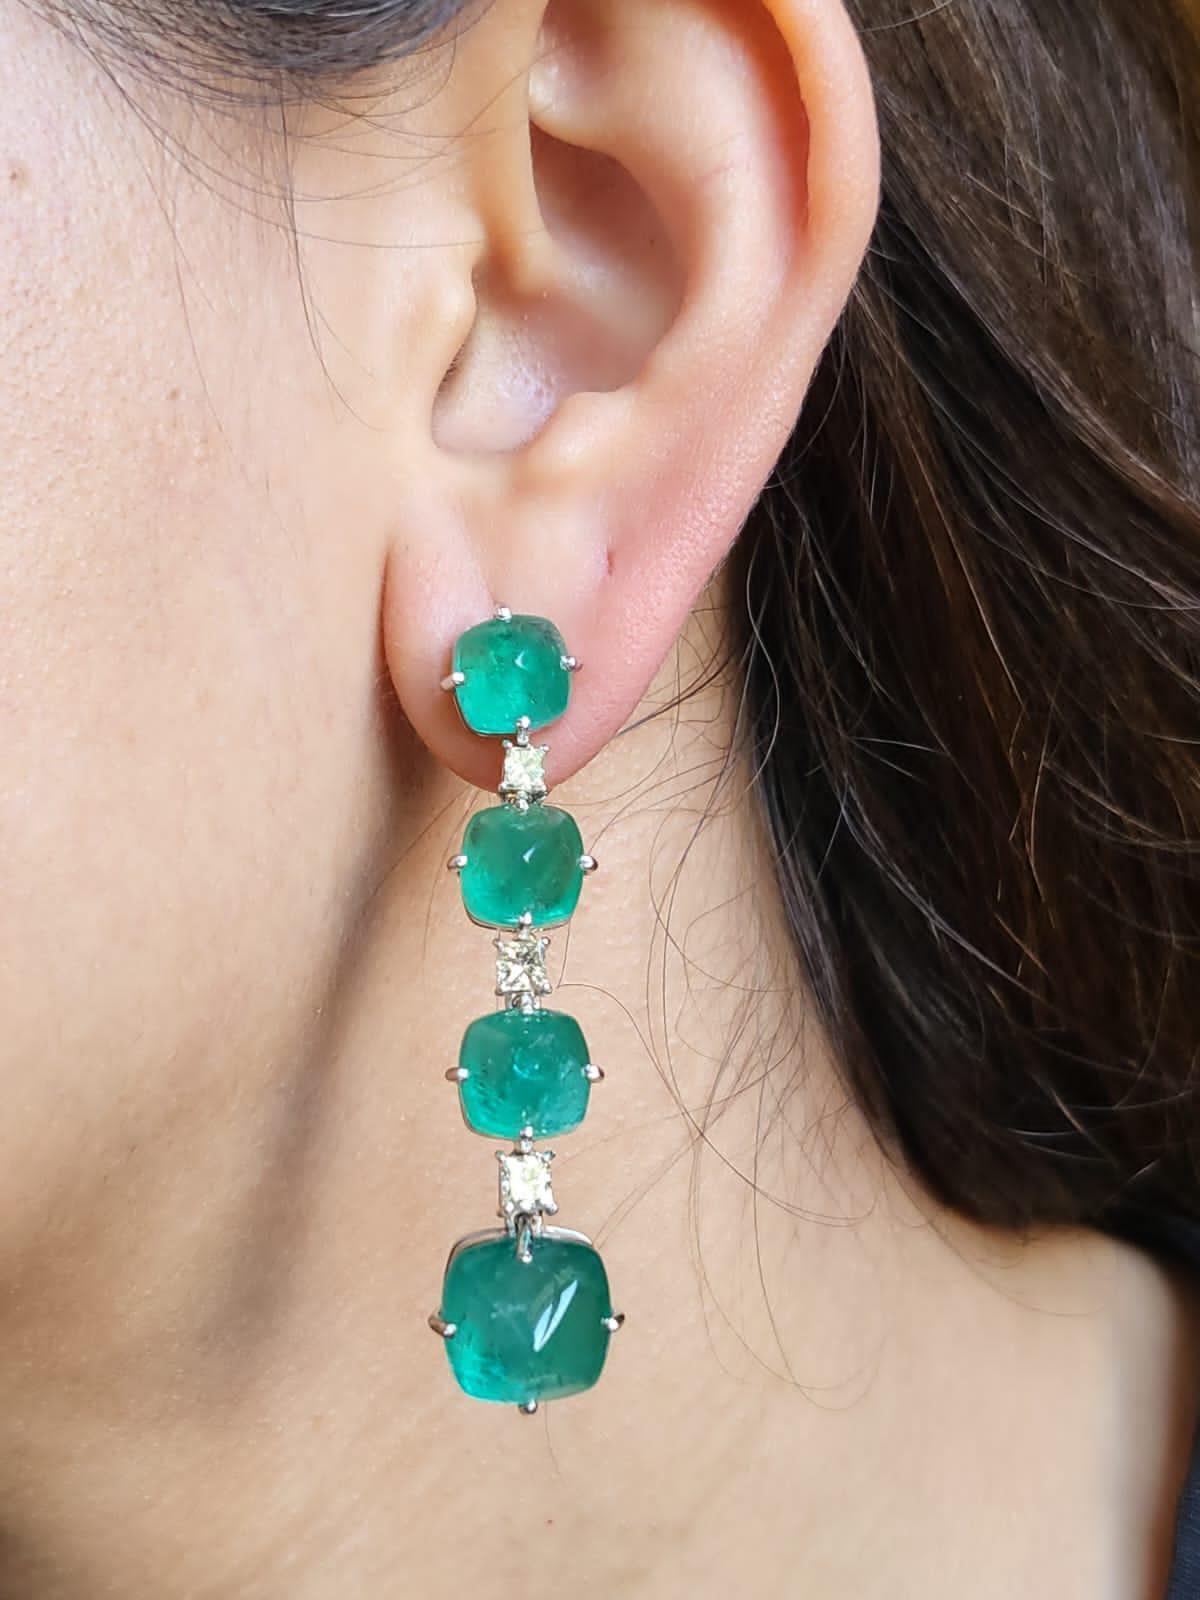 A very chic pair of Emerald Chandelier/ Dangle Earrings set in 18K White Gold & Diamonds. The weight of the Emerald sugarloafs is 31.99 carats. The Emerald Sugarloafs are completely natural, without any treatment and is of Zambian origin. The weight